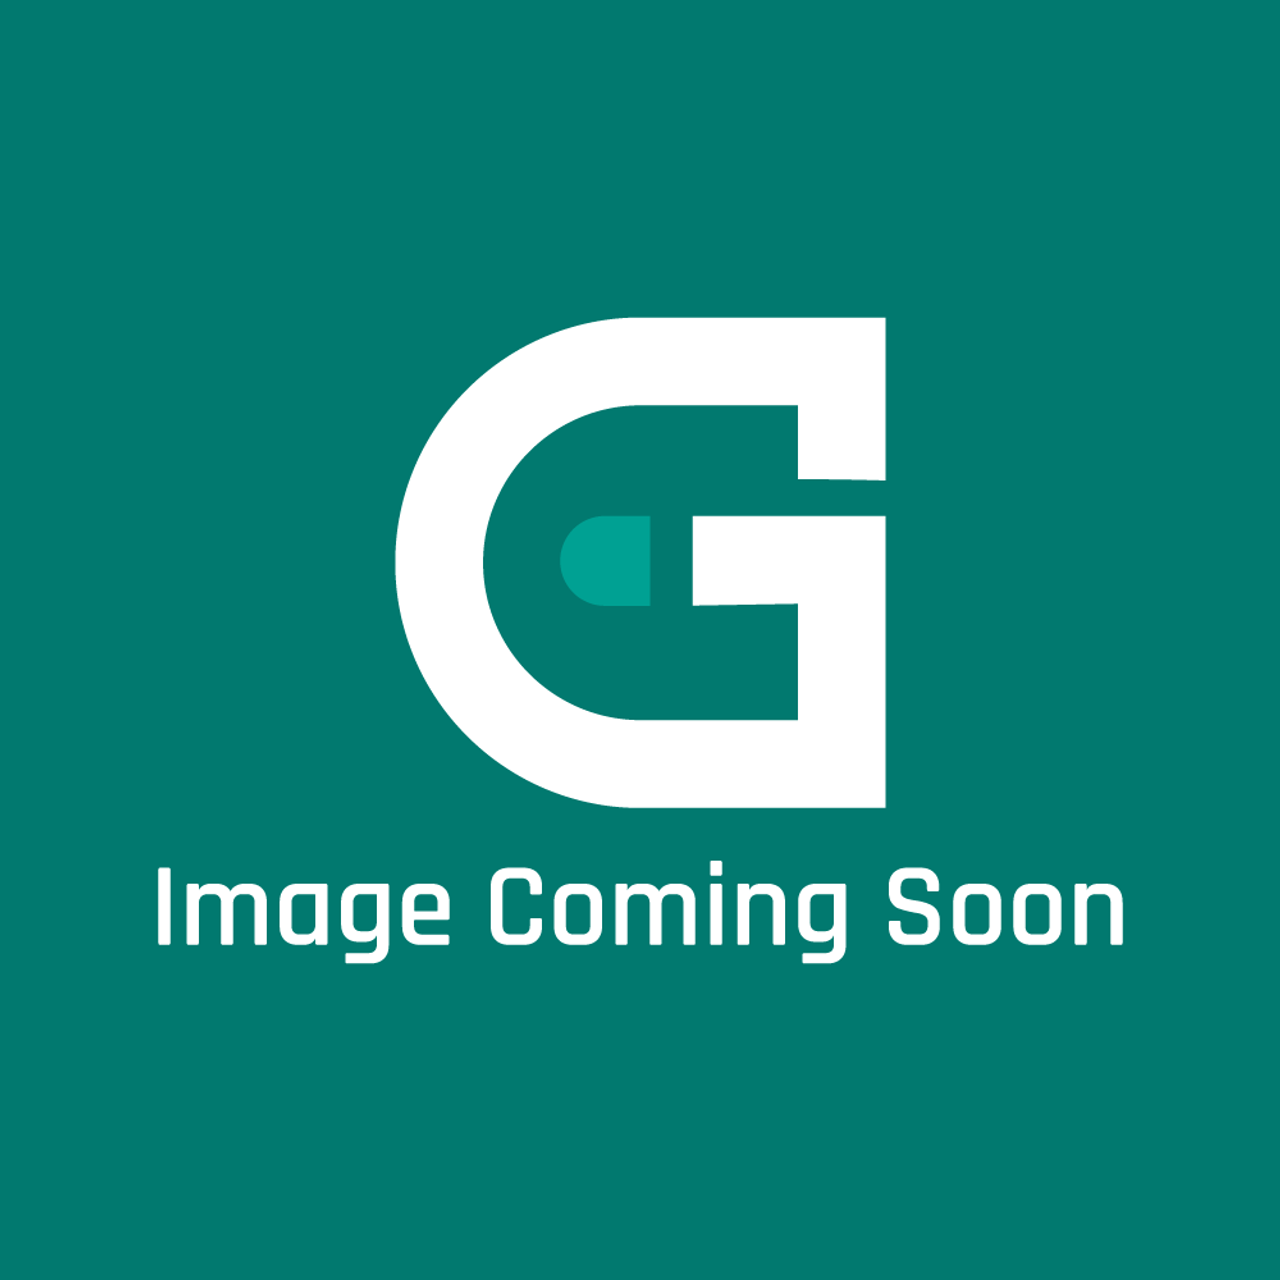 AGA Marvel RO4M998586 - Ckr Rear Disc Bfd01012/001 - Image Coming Soon!